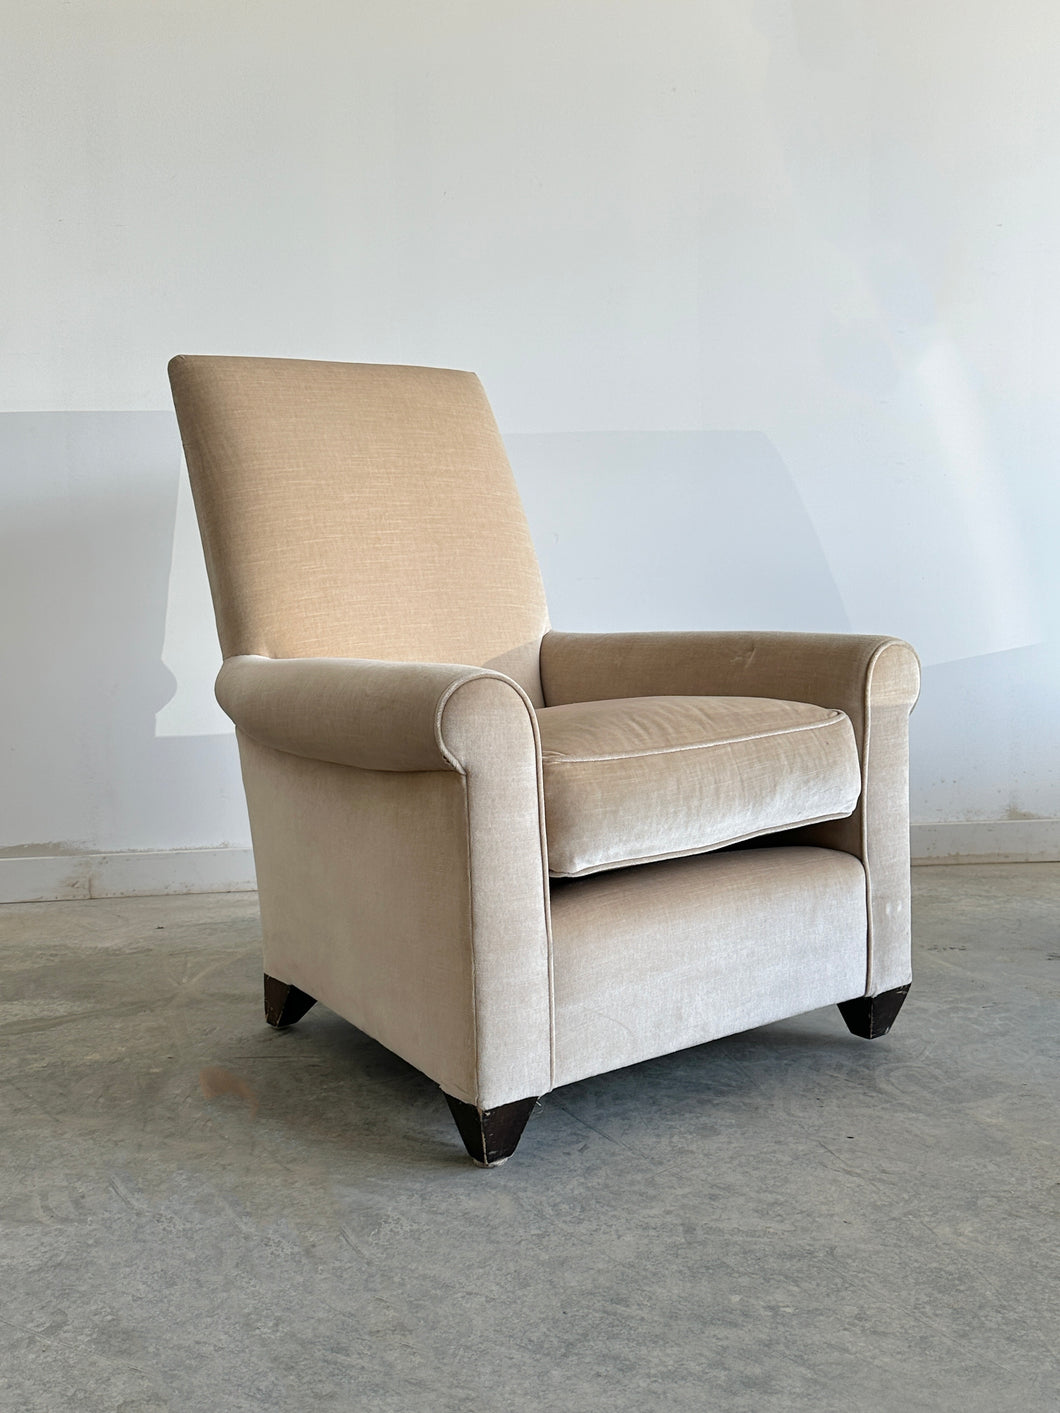 St. James chairs by Angelo Donghia